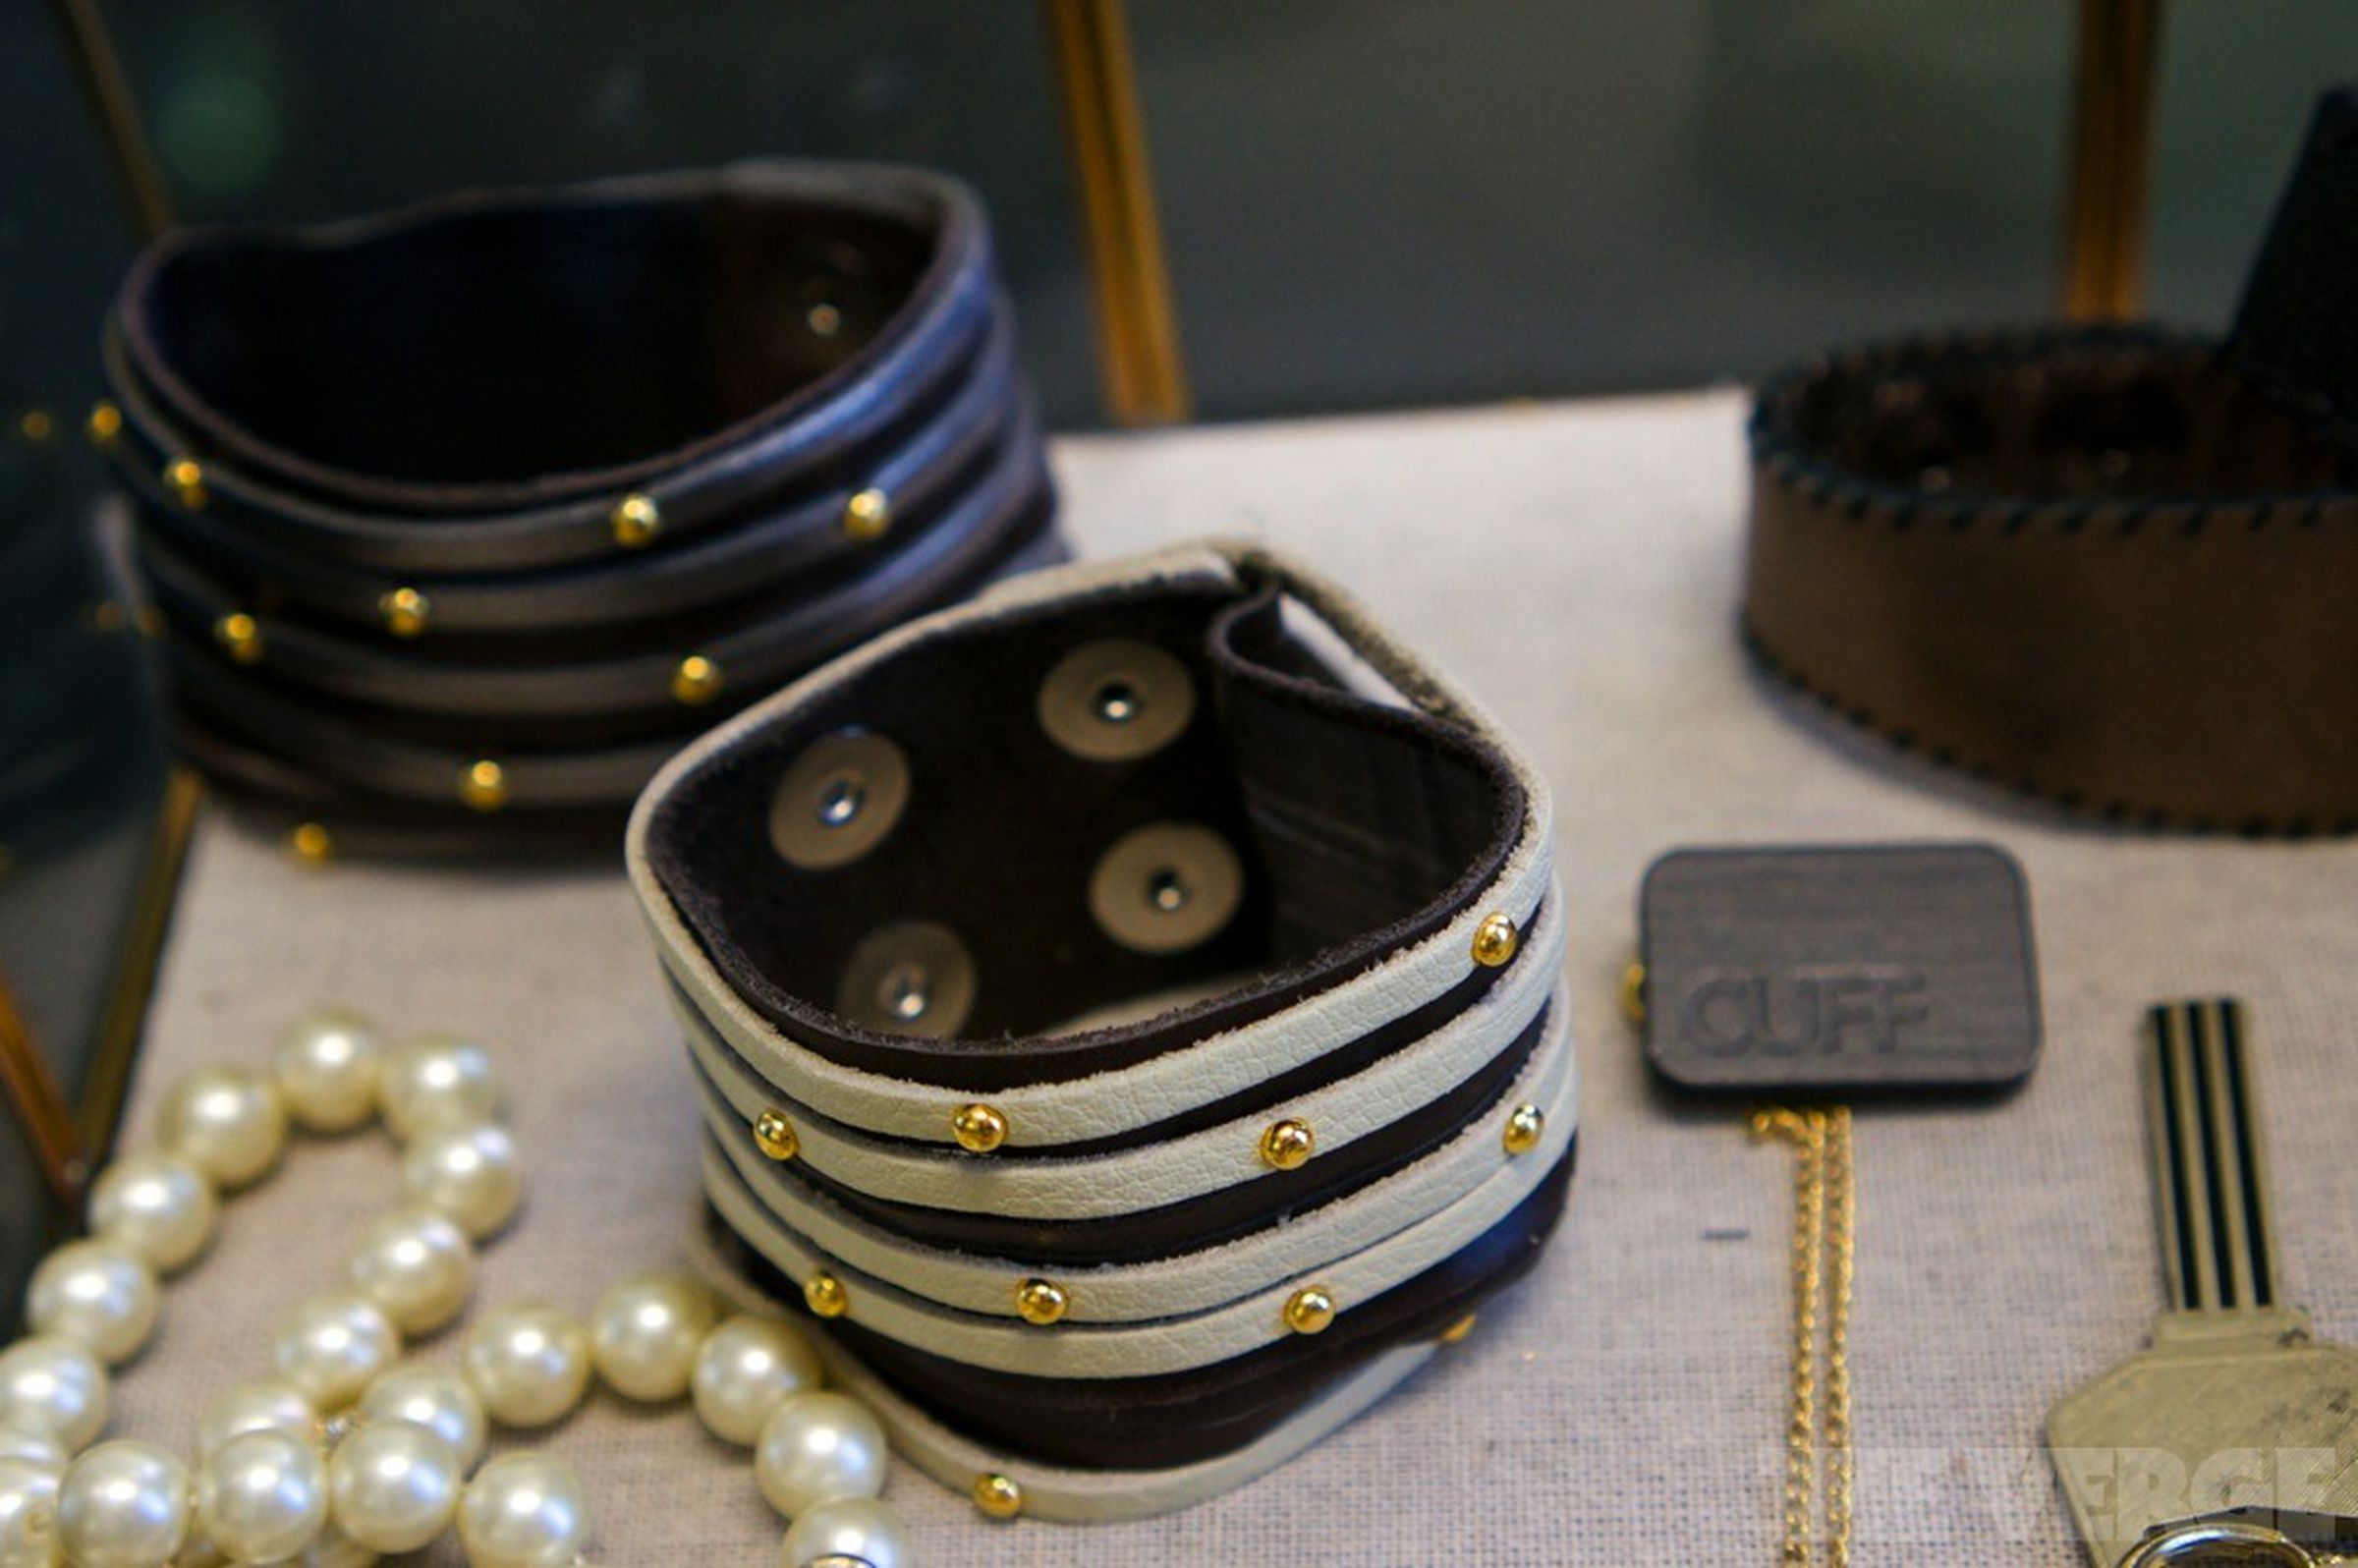 Cuff's collection of wearable technology